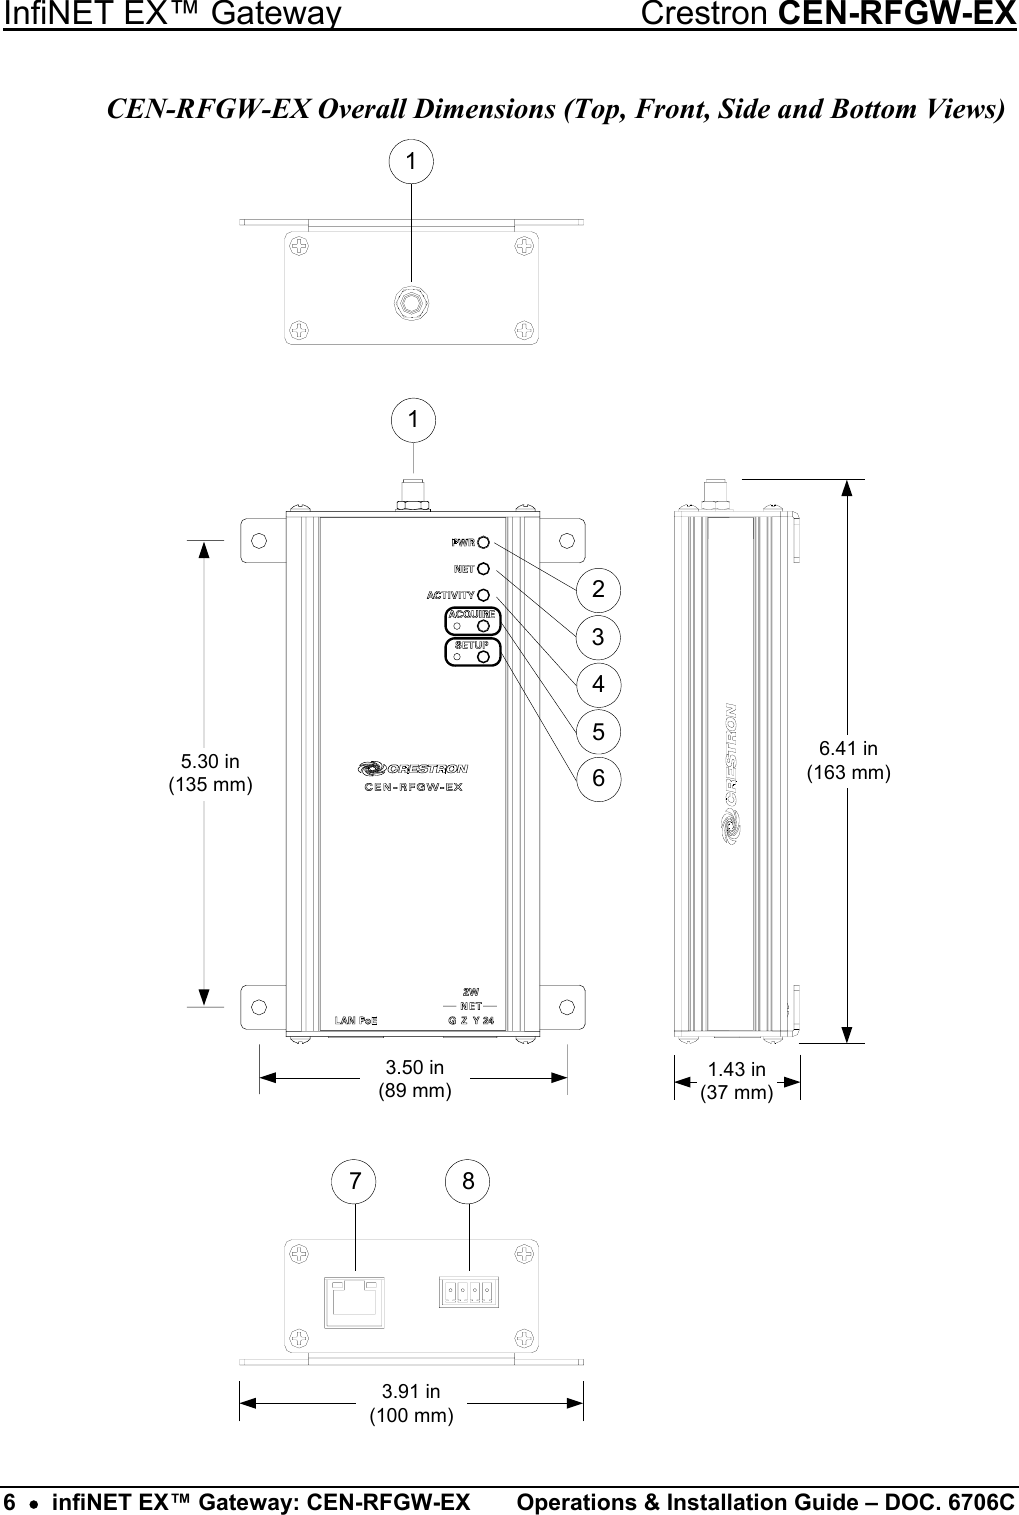 InfiNET EX™ Gateway  Crestron CEN-RFGW-EX CEN-RFGW-EX Overall Dimensions (Top, Front, Side and Bottom Views) 1783.91 in(100 mm)6.41 in(163 mm)1.43 in(37 mm)654215.30 in(135 mm)3.50 in(89 mm)3 6  •  infiNET EX™ Gateway: CEN-RFGW-EX  Operations &amp; Installation Guide – DOC. 6706C 